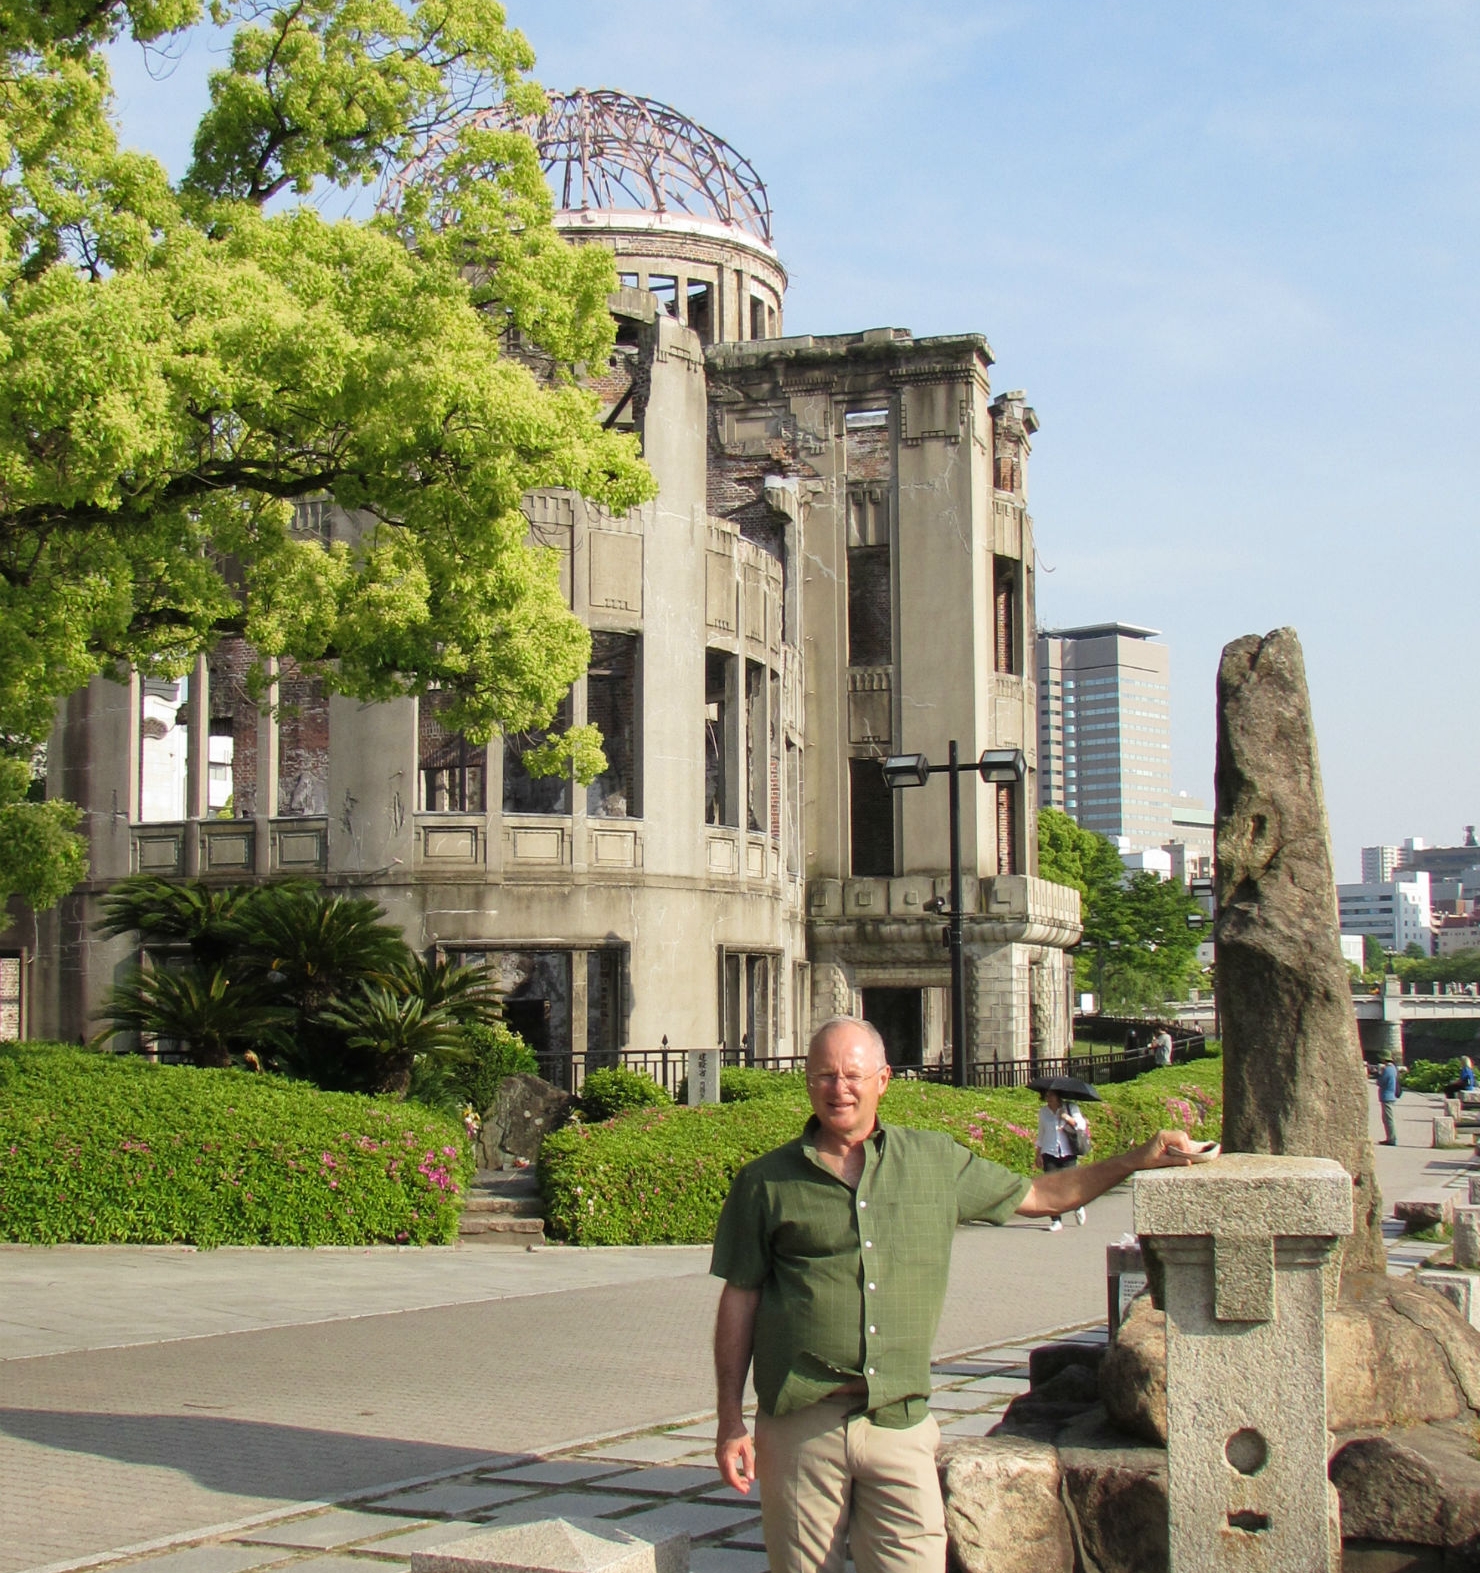 In front of the atomic dome in Hiroshima